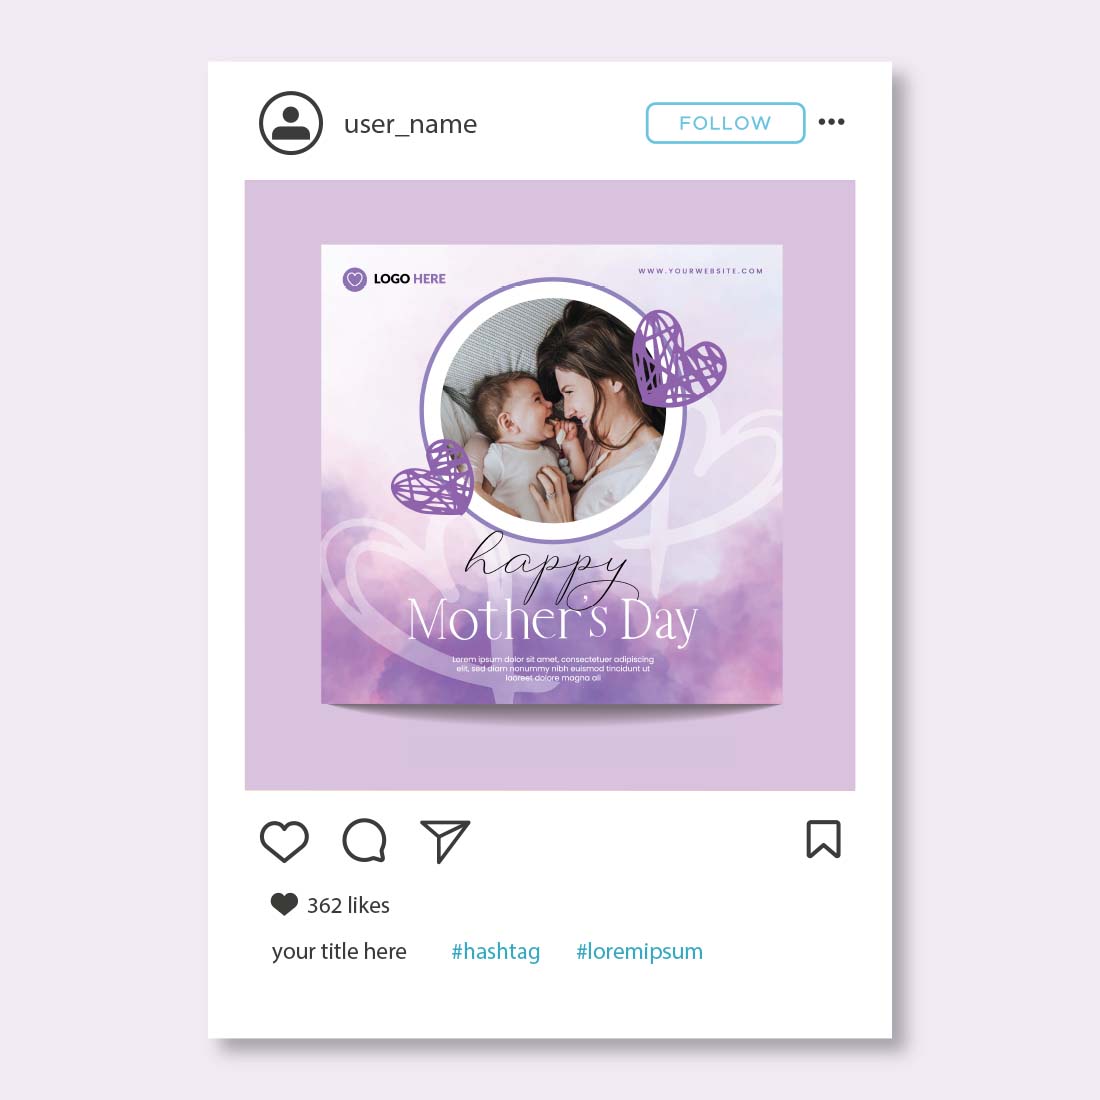 Mothers day special social media banner design template preview image.